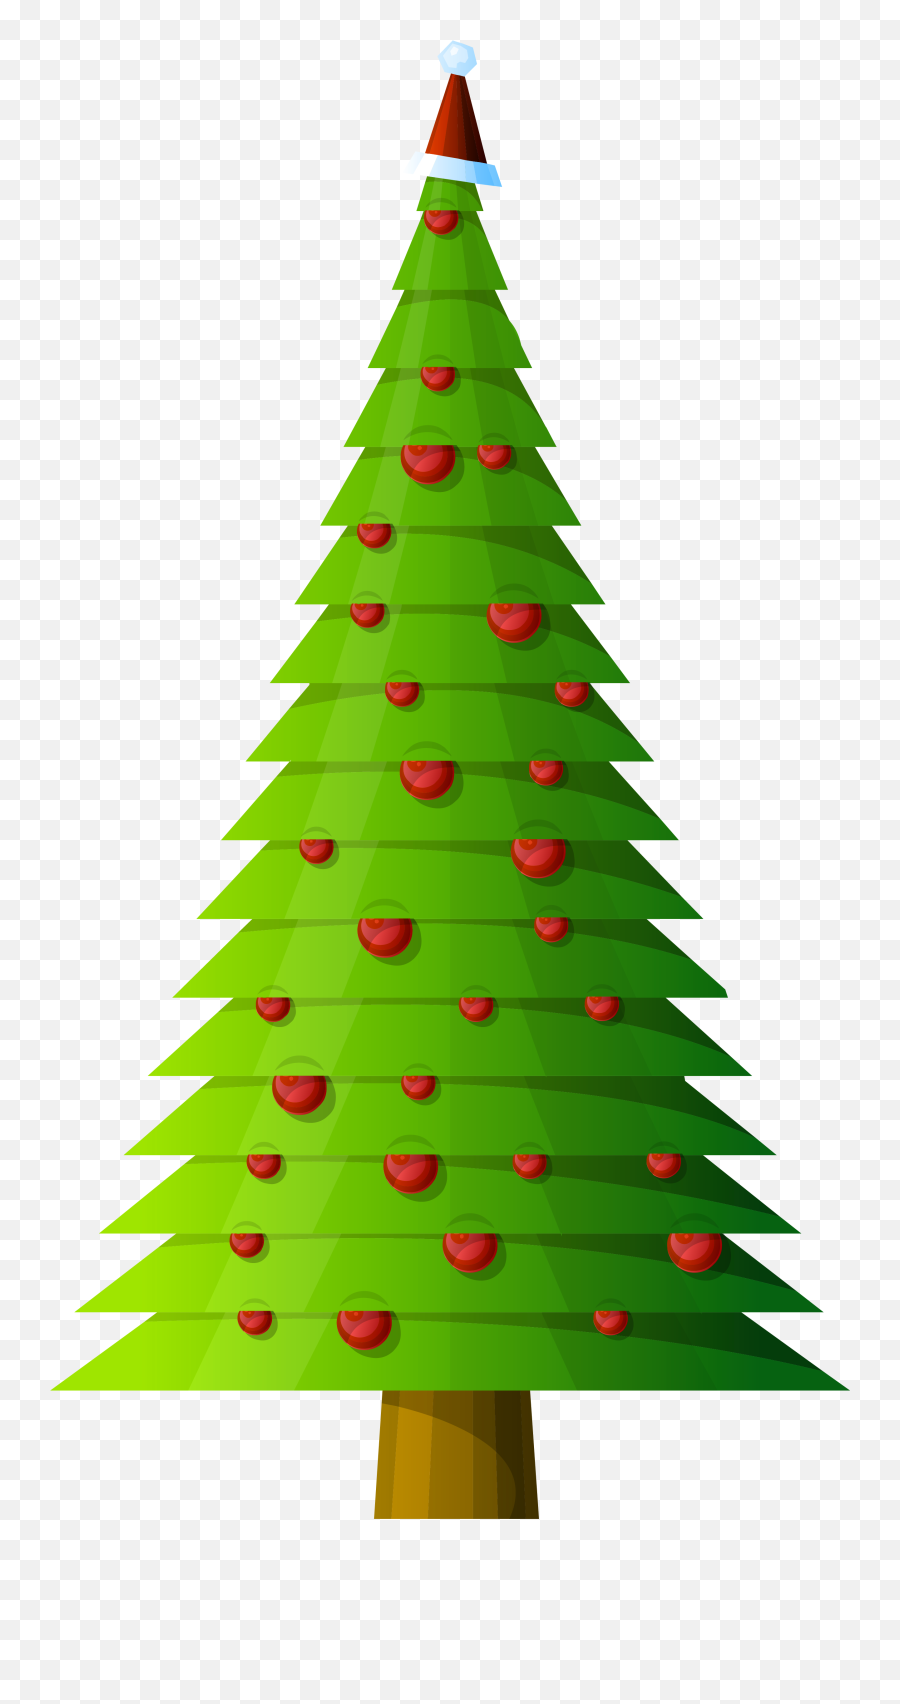 Christmas Trees Pictures Clip Art - Clipart Best Emoji,Emoji Christmas Ornaments